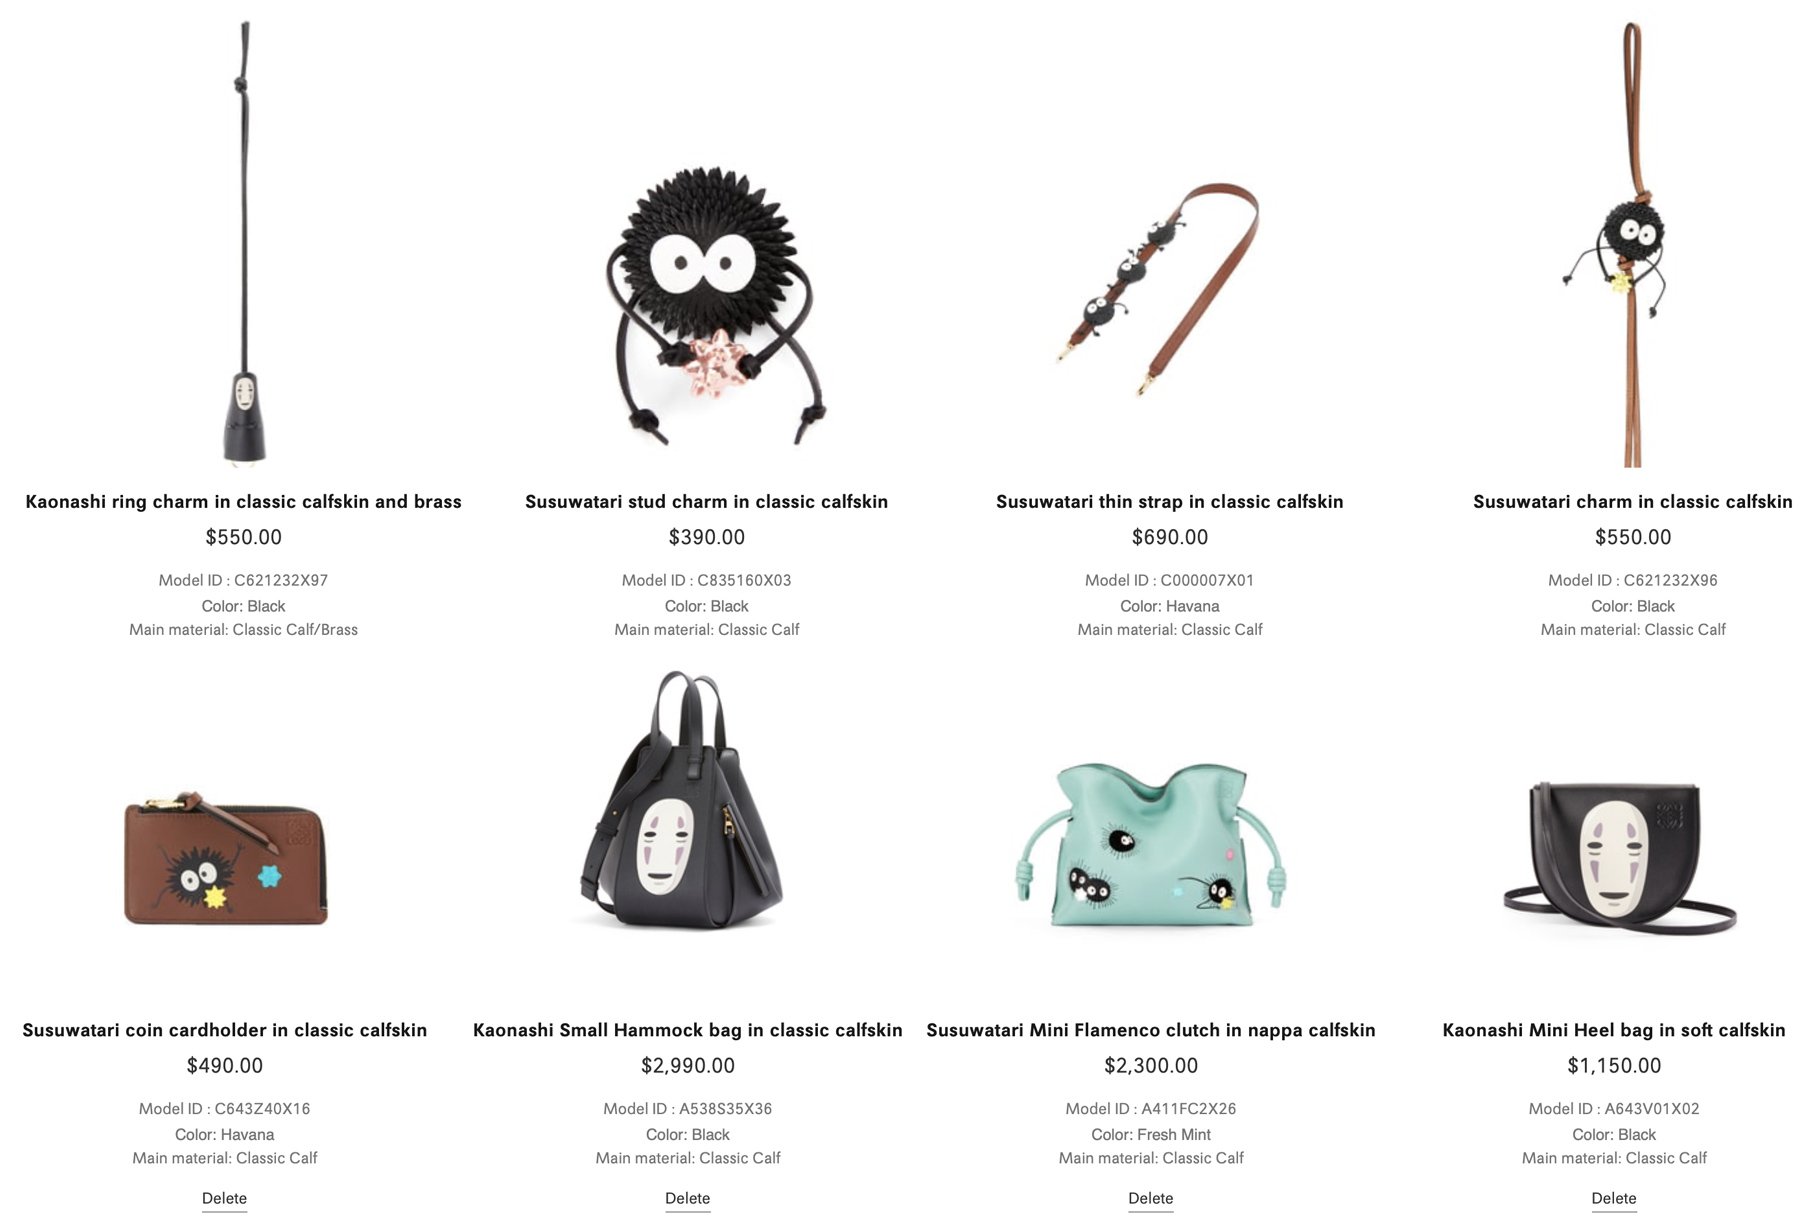 Things I Would Buy: If I had properly registered for the Spirited Away x Loewe collection